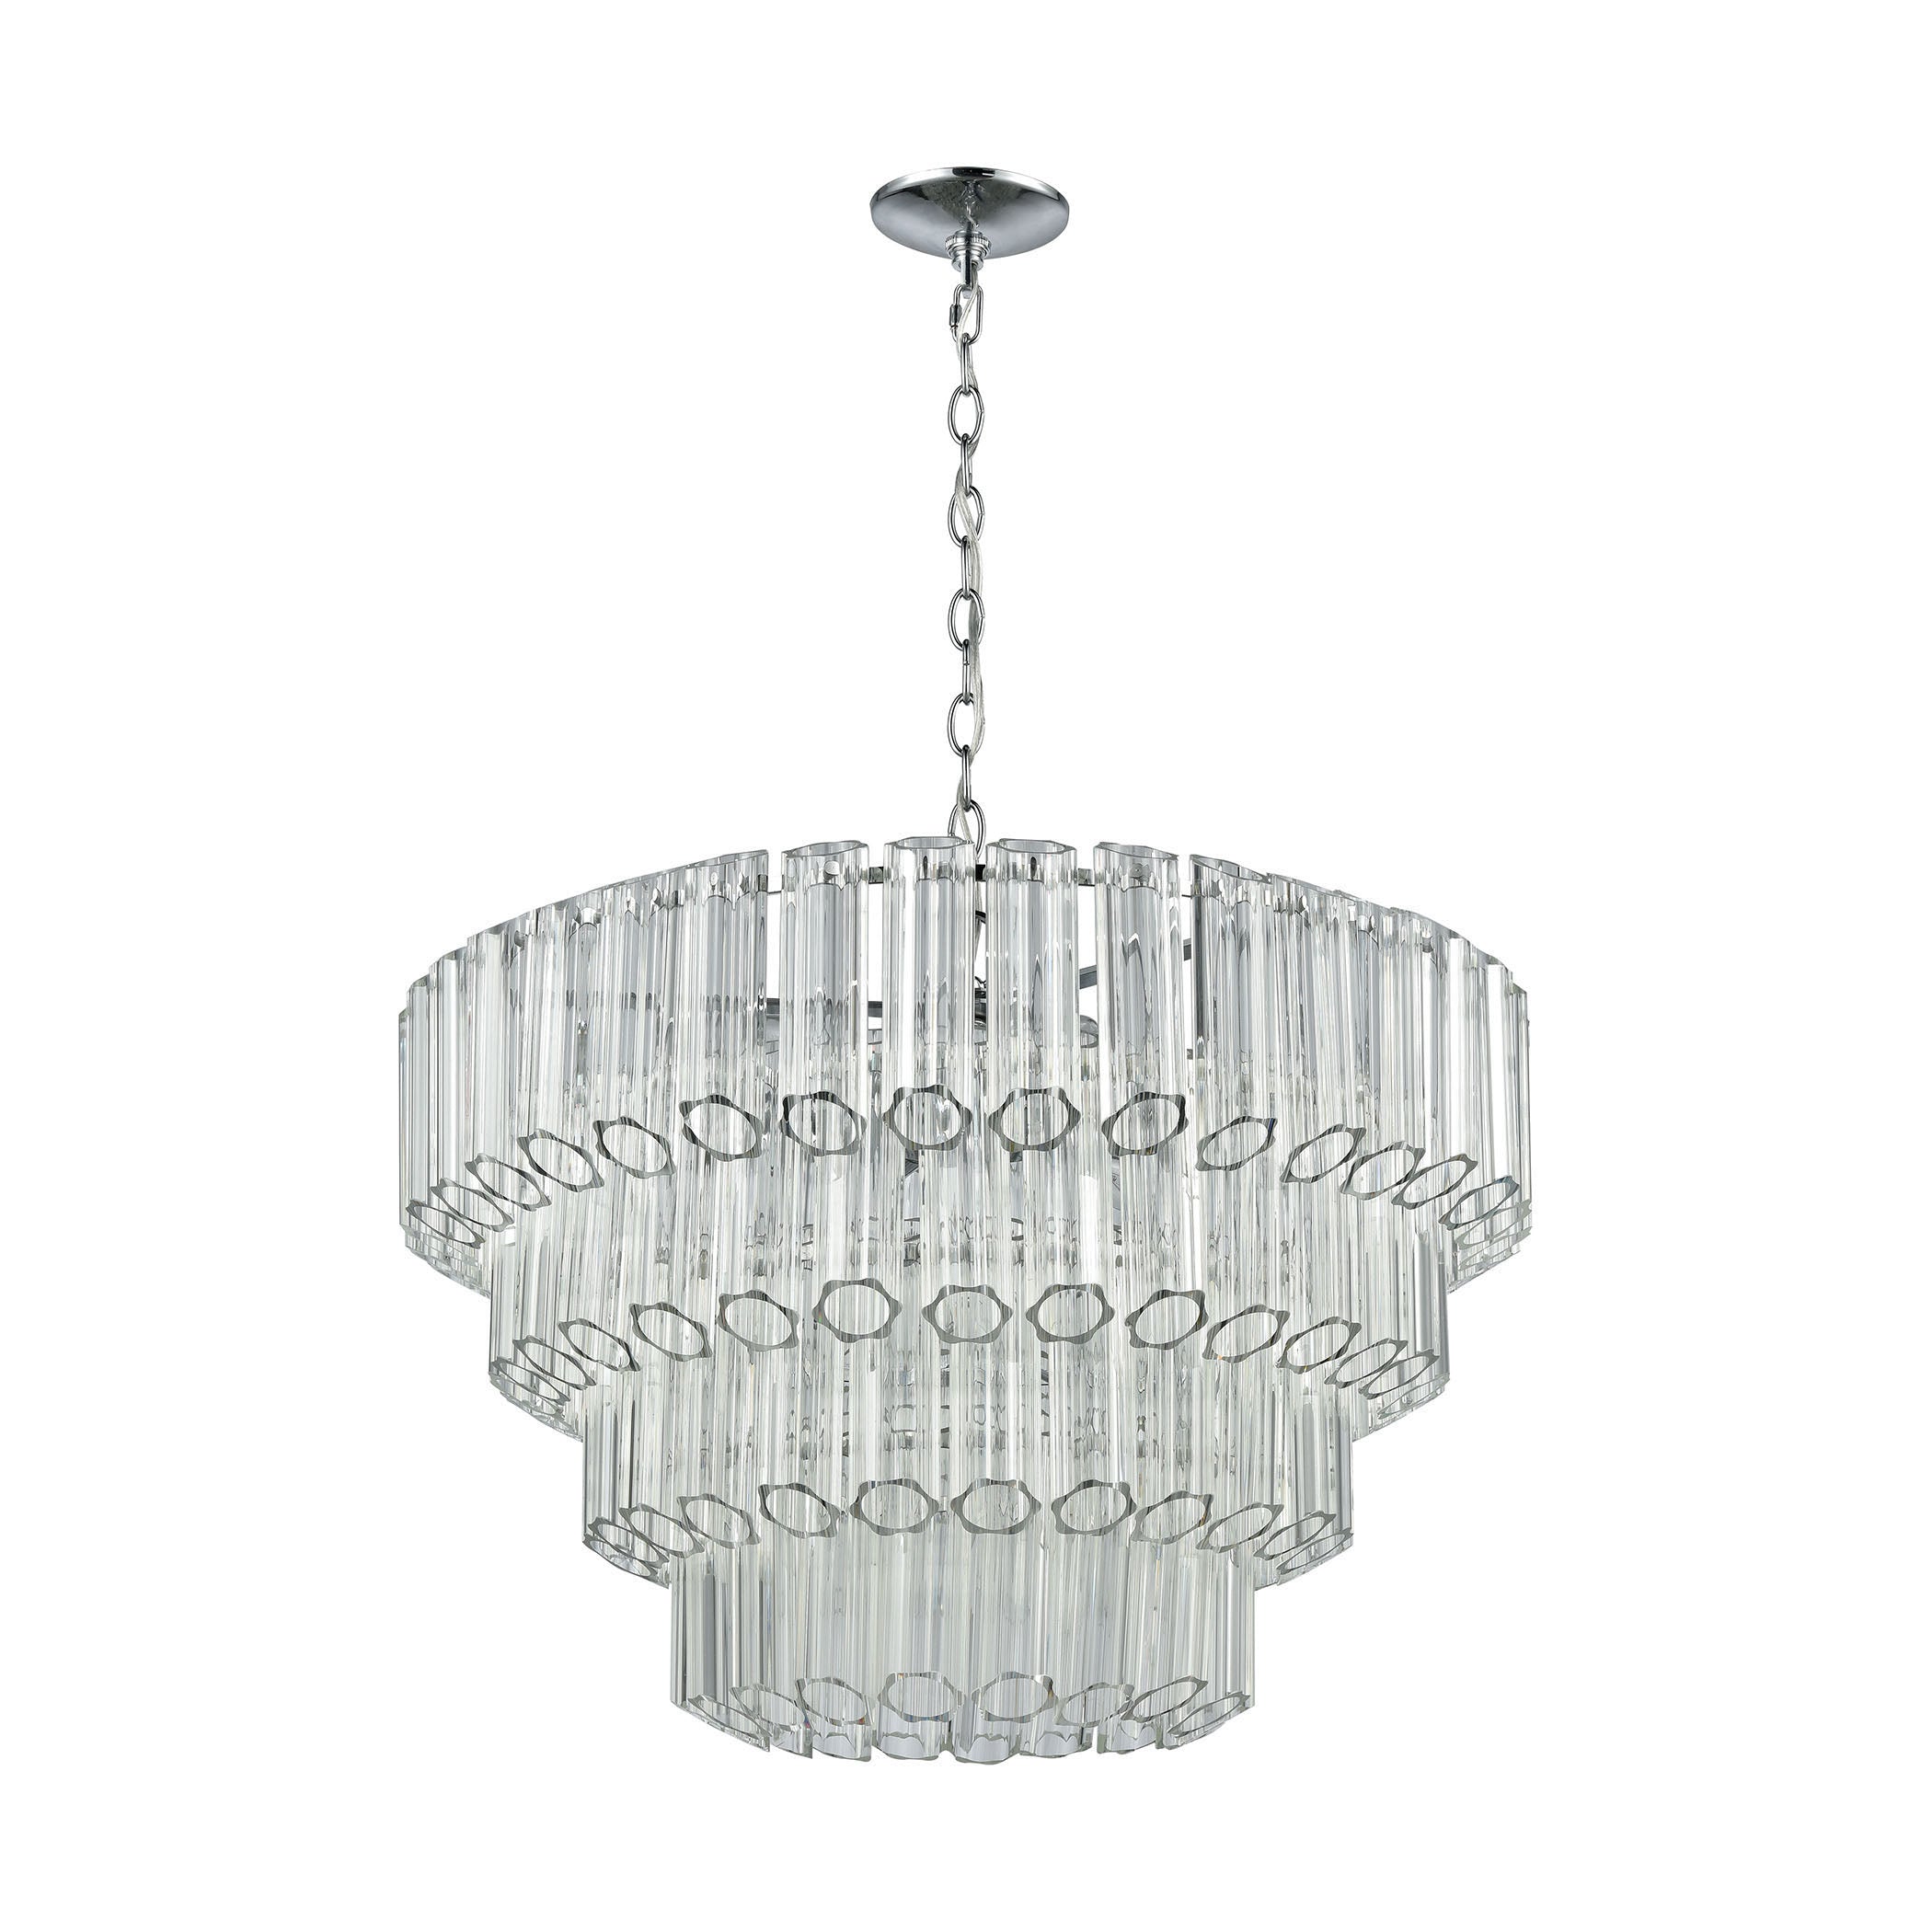 ELK Lighting 46313/7 Carrington 7-Light Chandelier in Polished Chrome with Clear Glass